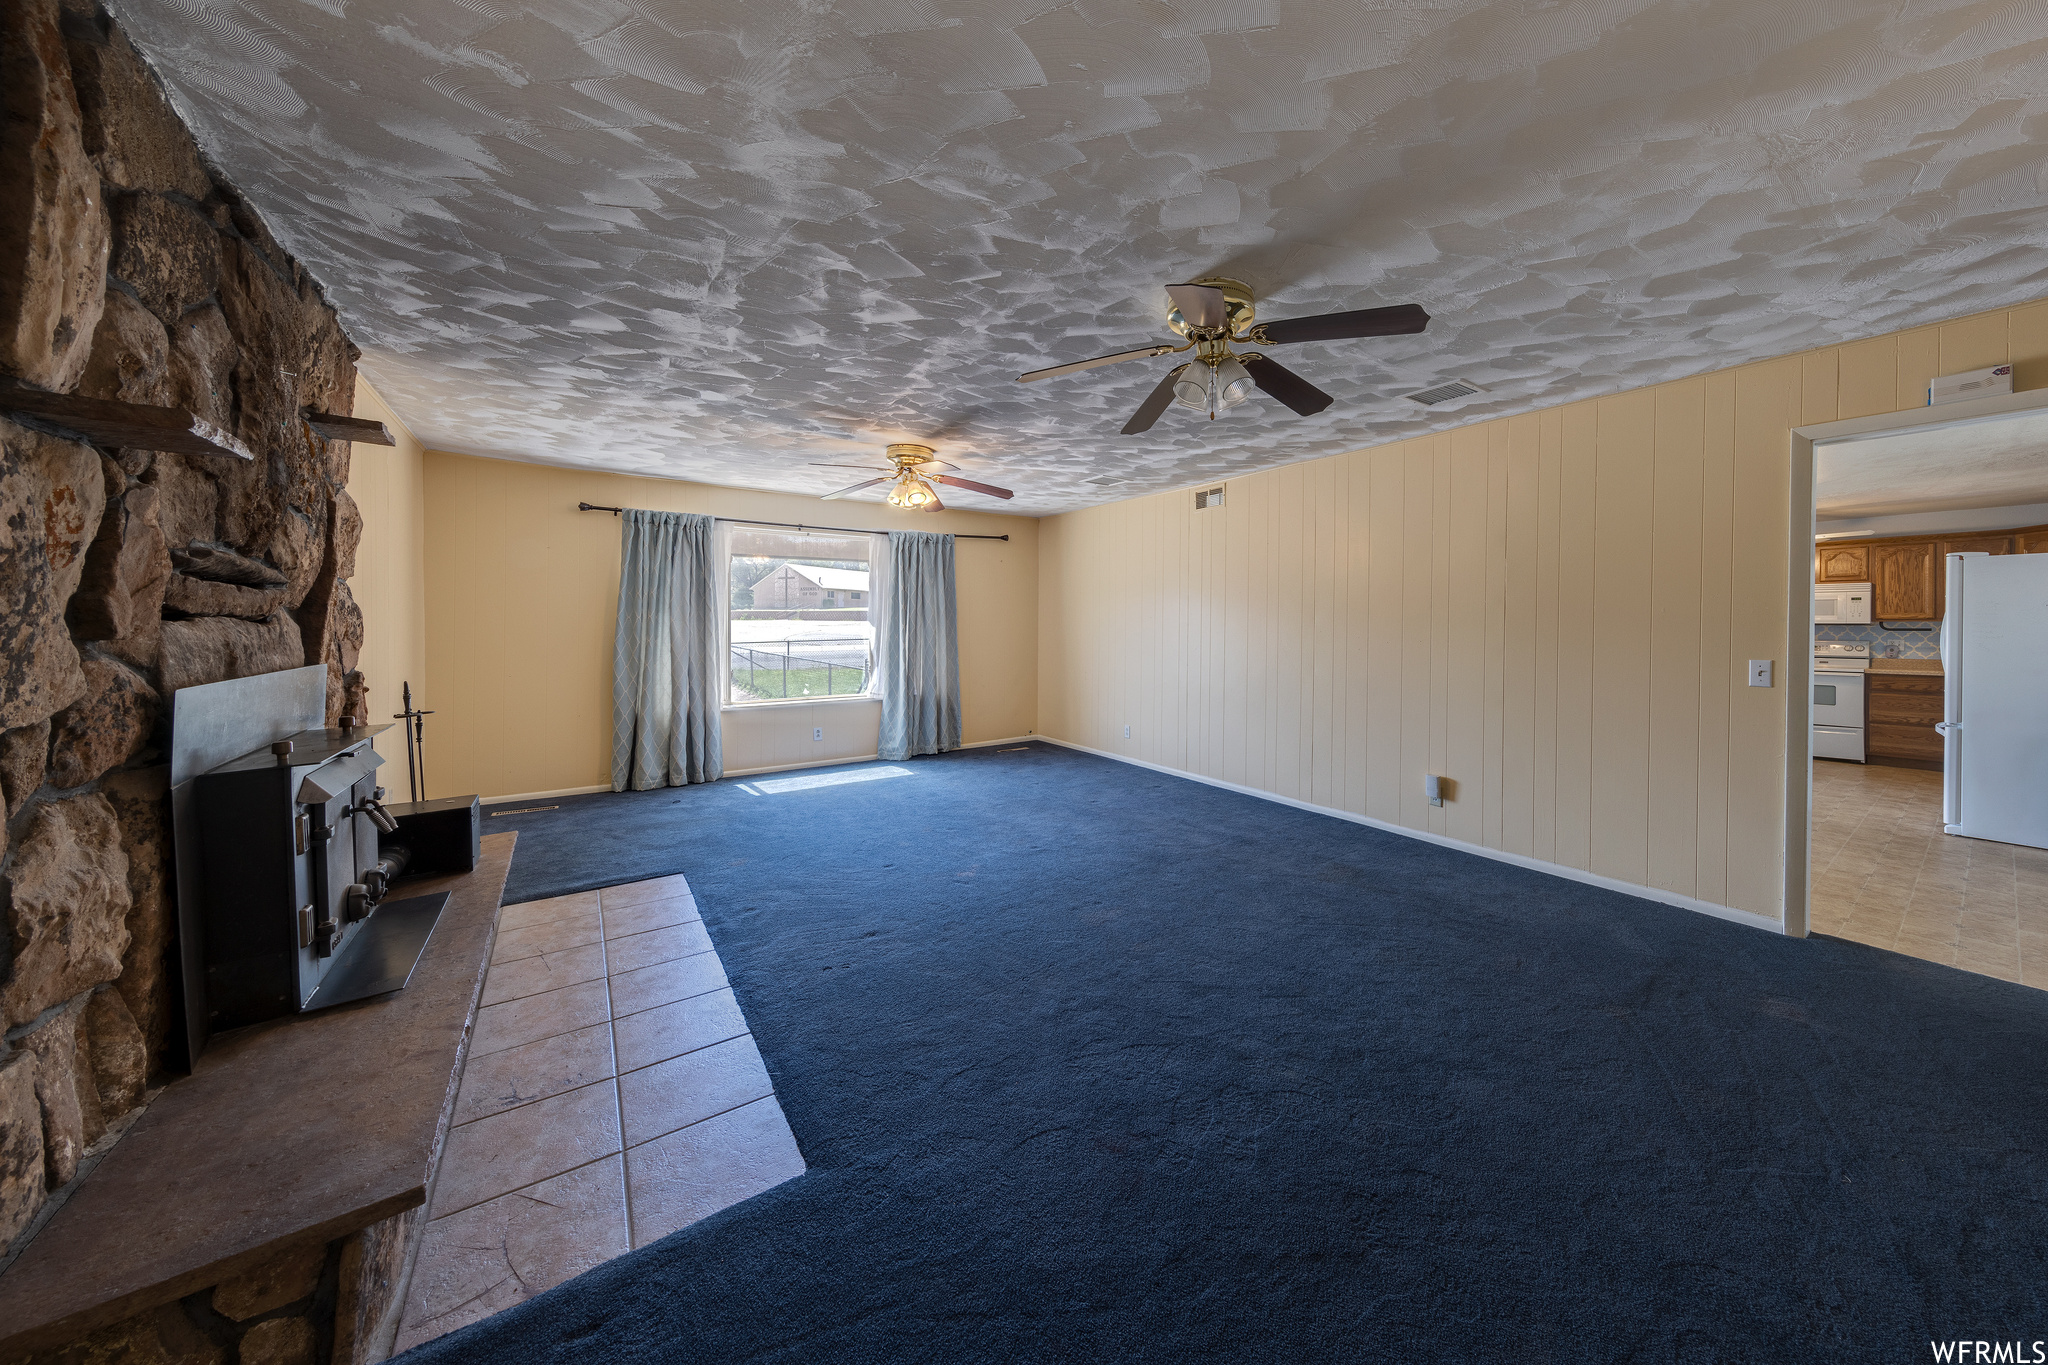 Carpeted living room with natural light and a ceiling fan